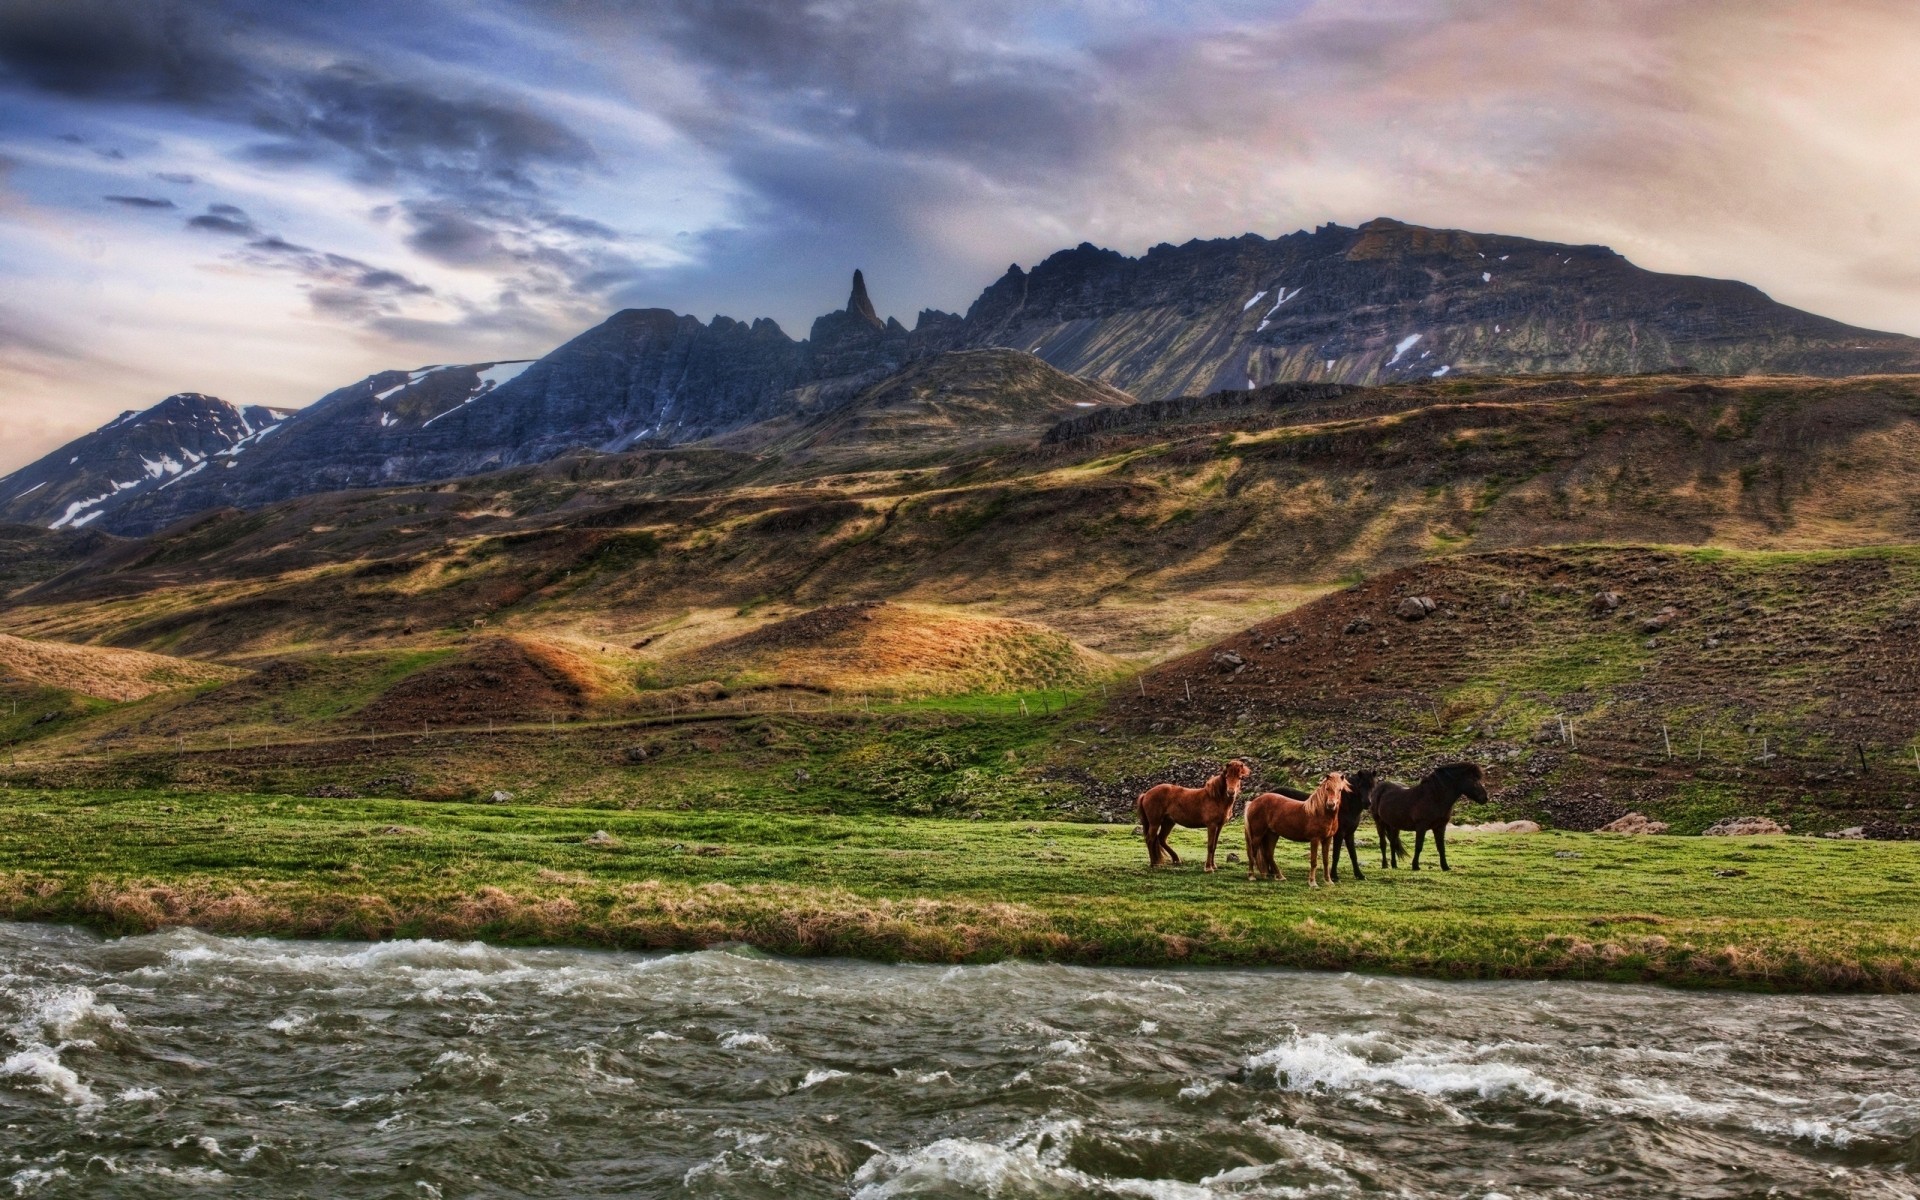 animals mountain landscape travel outdoors water sky nature scenic valley snow grass lake daylight horse